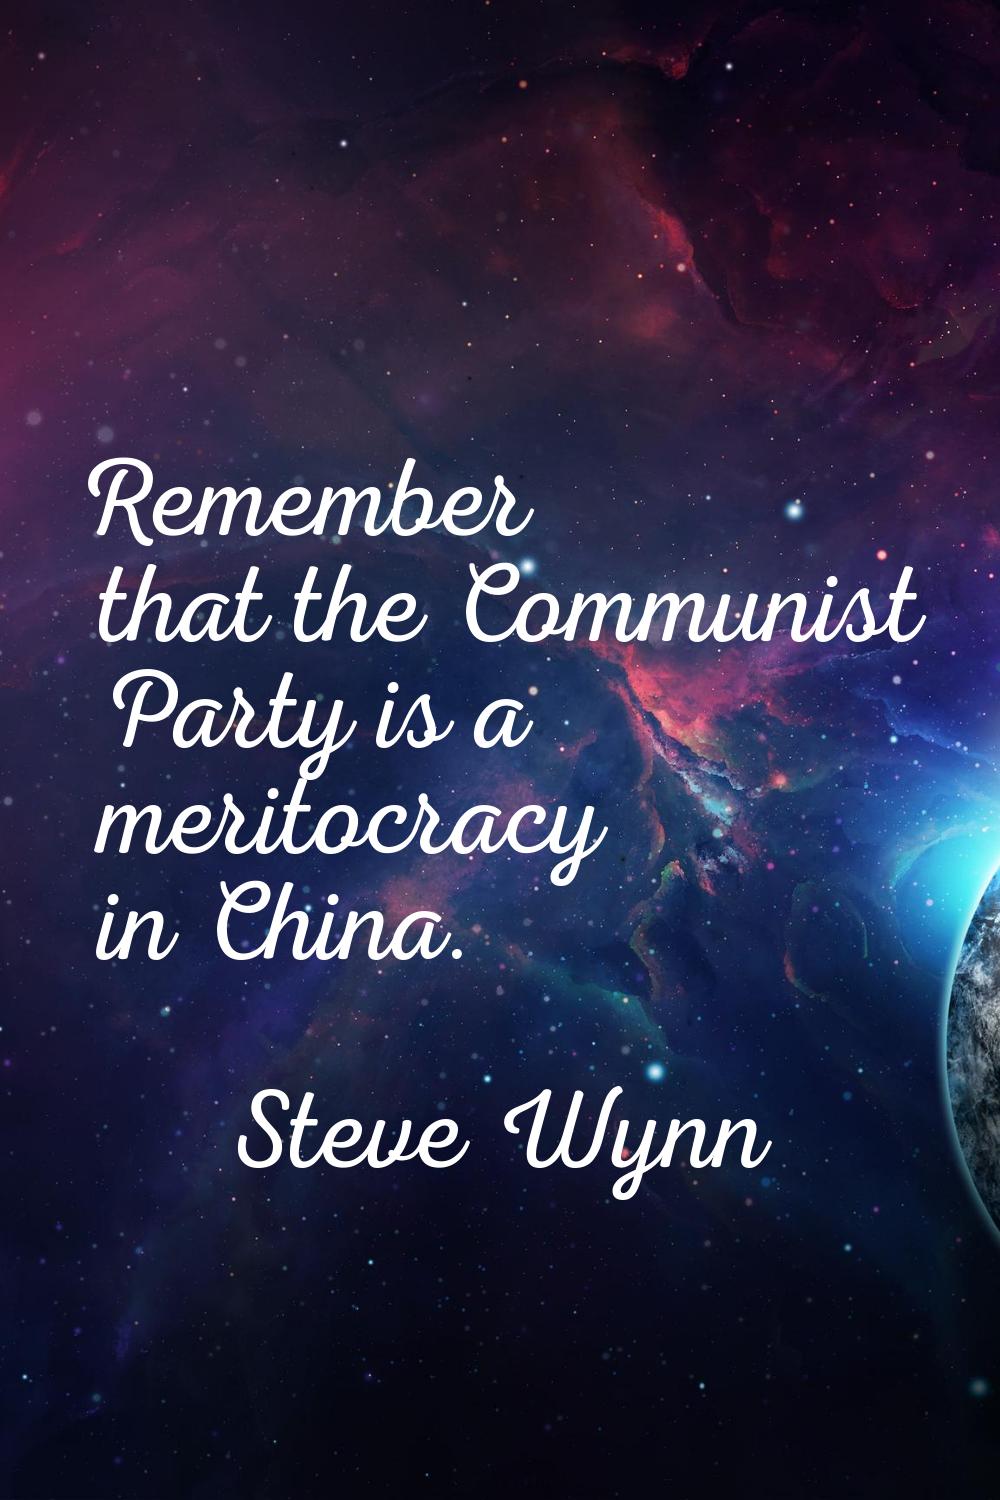 Remember that the Communist Party is a meritocracy in China.